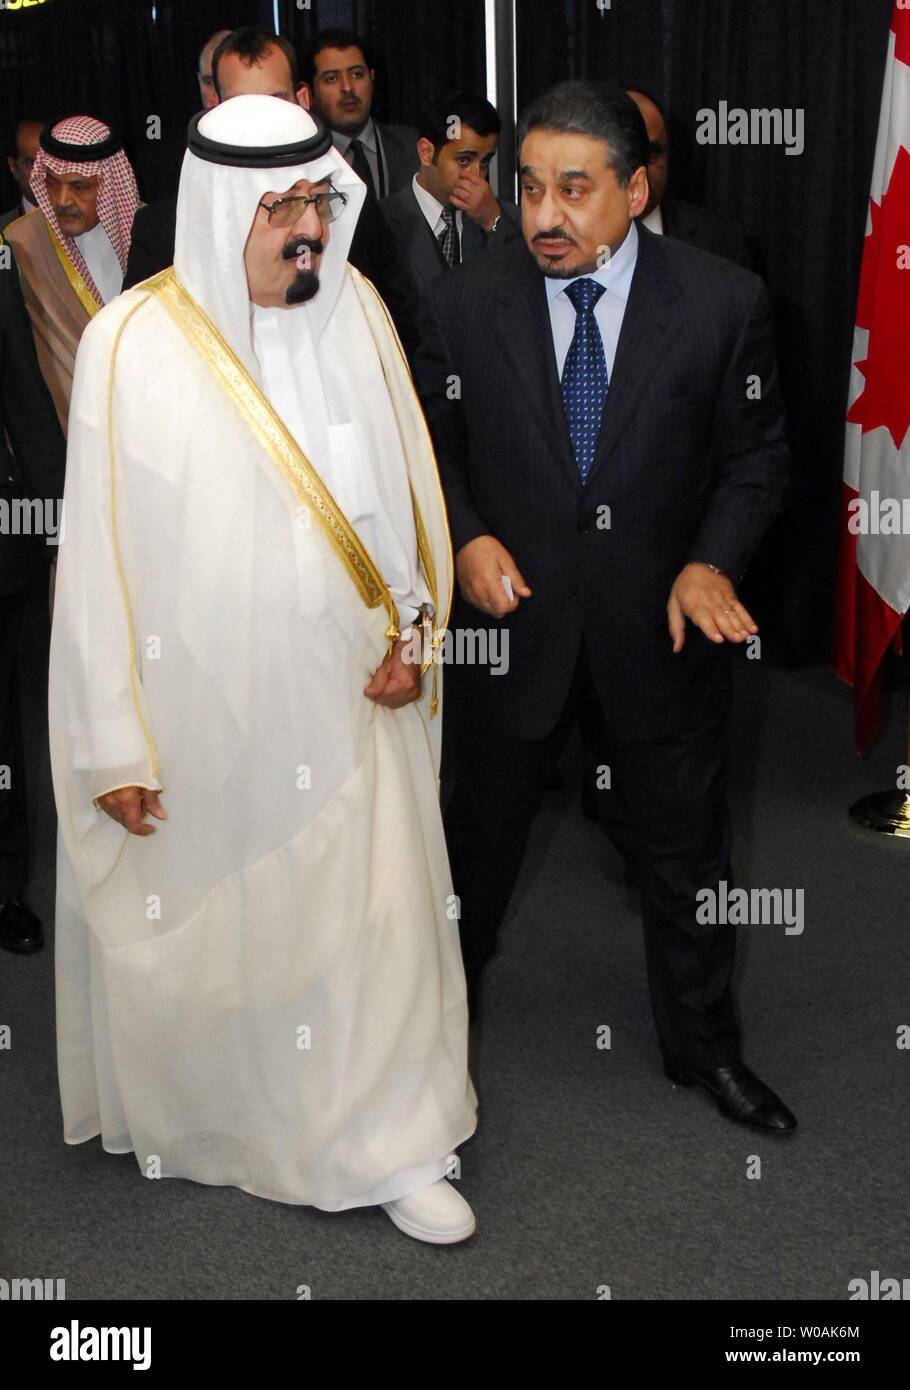 King Abdallah bin Abdulaziz al Saud is greeted as he arrives at Toronto International Airport to attend the G-8 and G-20 Summits in Huntsville and Toronto, Ontario on Friday June 25, 2010.  UPI/Simon Wilson. Stock Photo